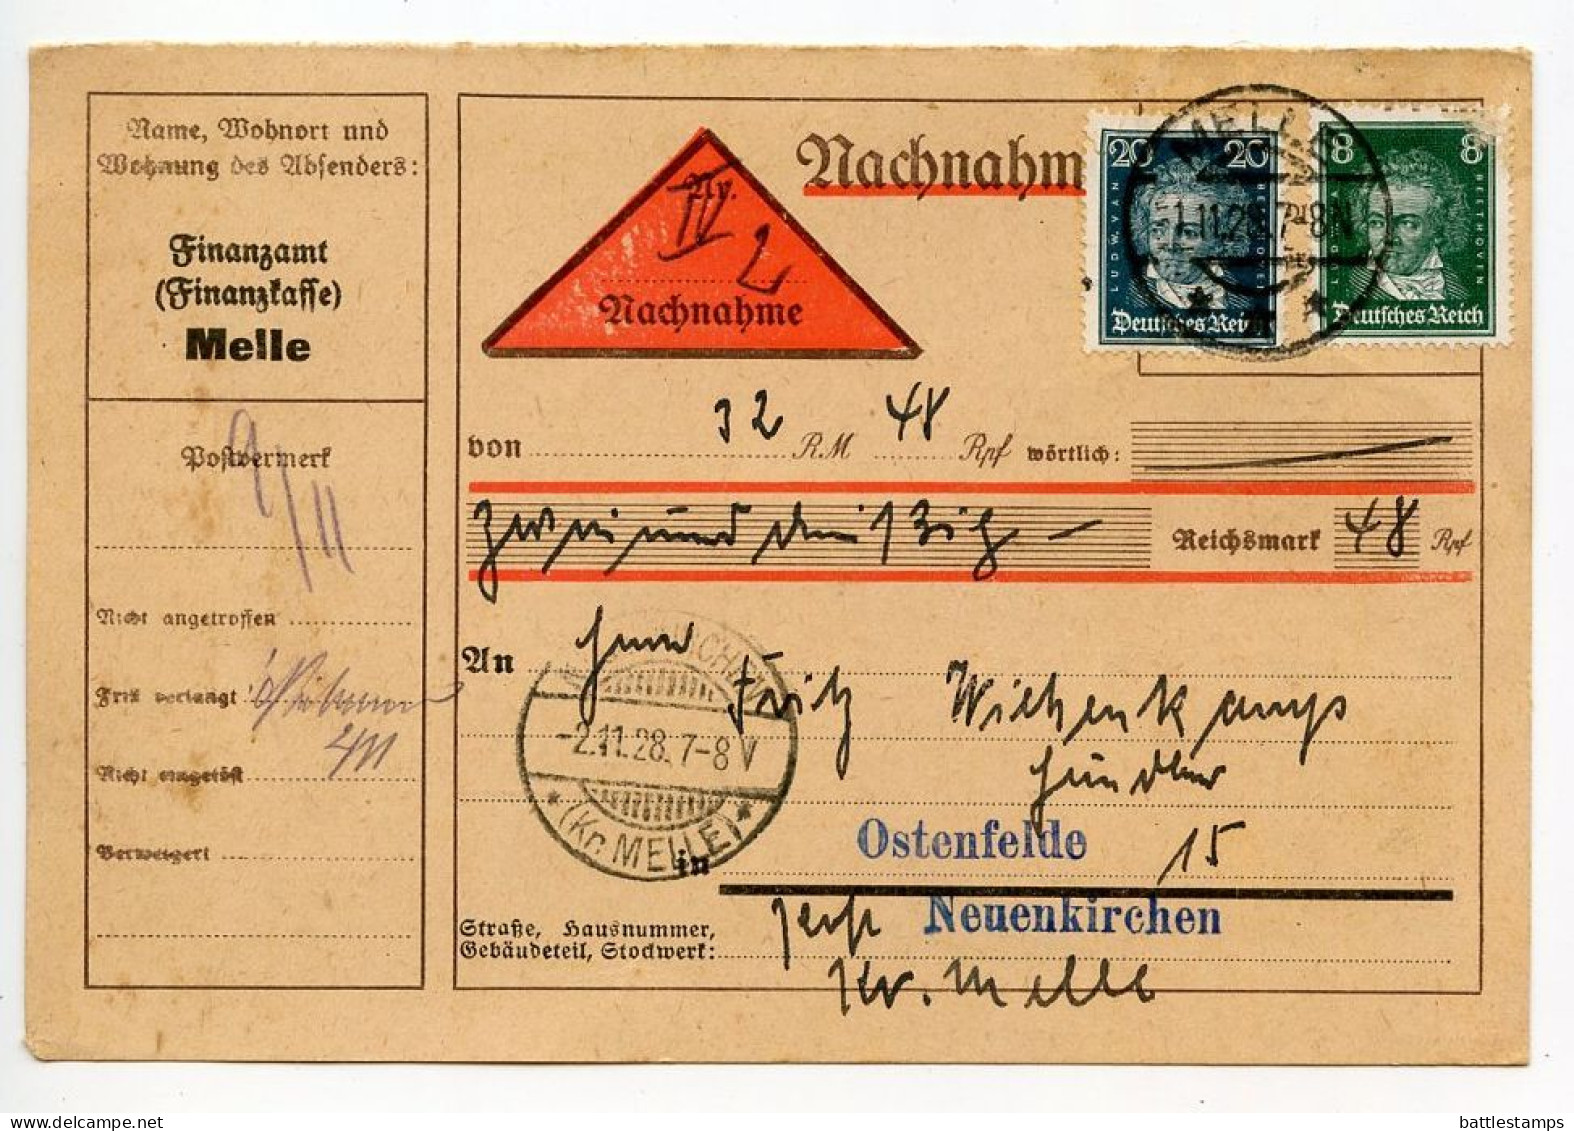 Germany 1928 Nachnahme Postcard; Melle - Finanzamt (Tax Office) To Ostenfelde, Neuenkirchen; 8pf. & 20pf. Beethoven - Covers & Documents